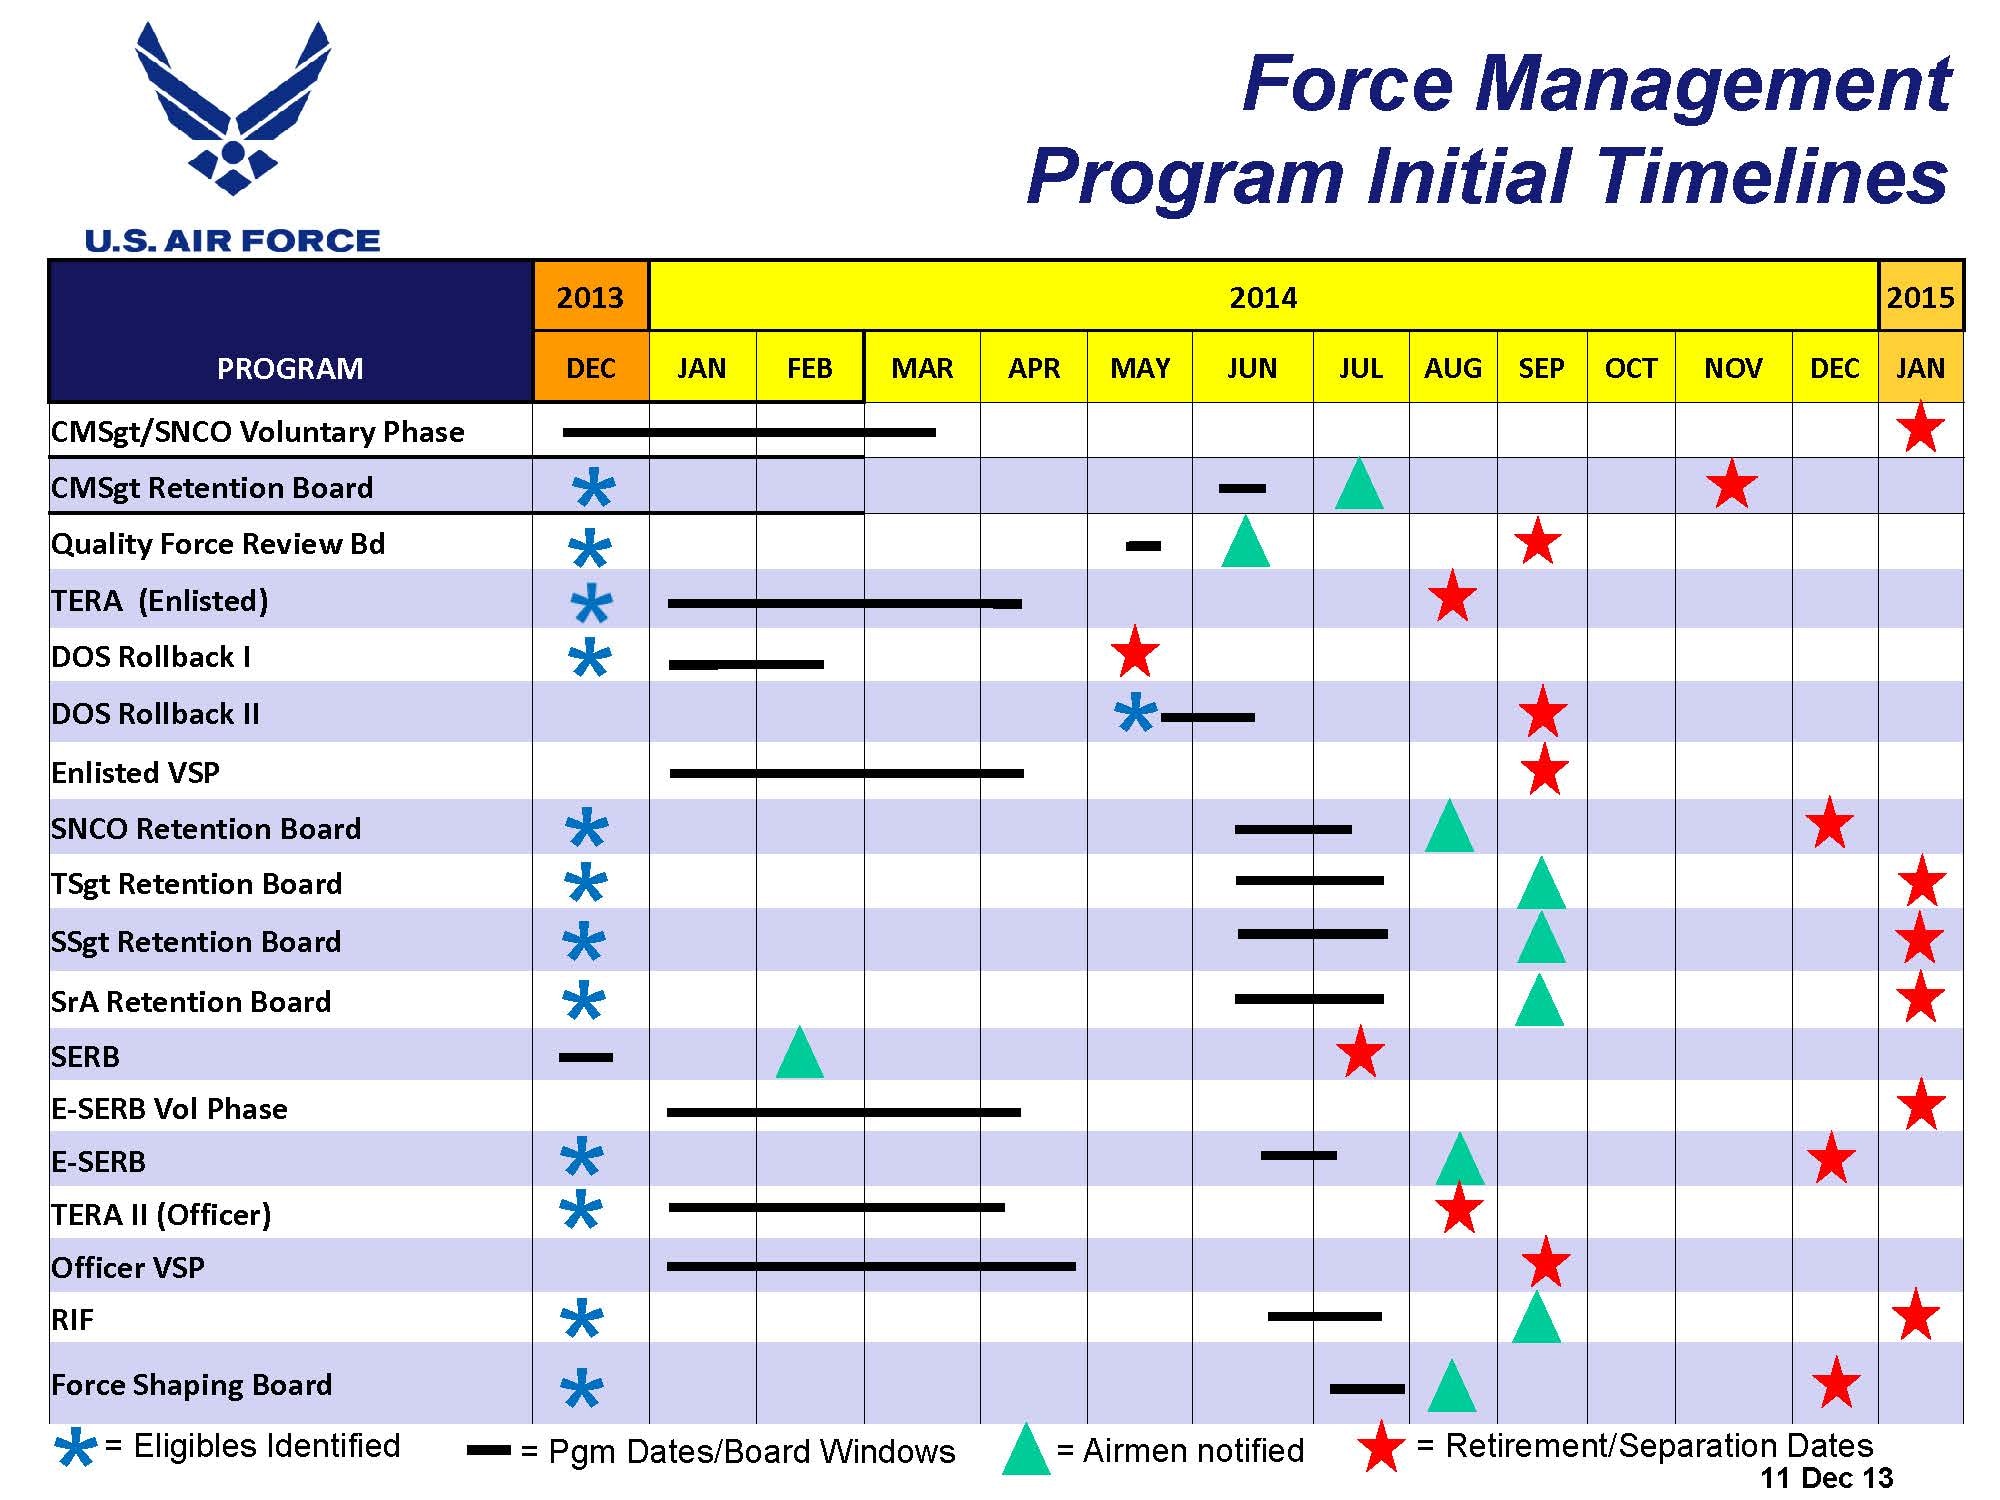 assignment management system air force